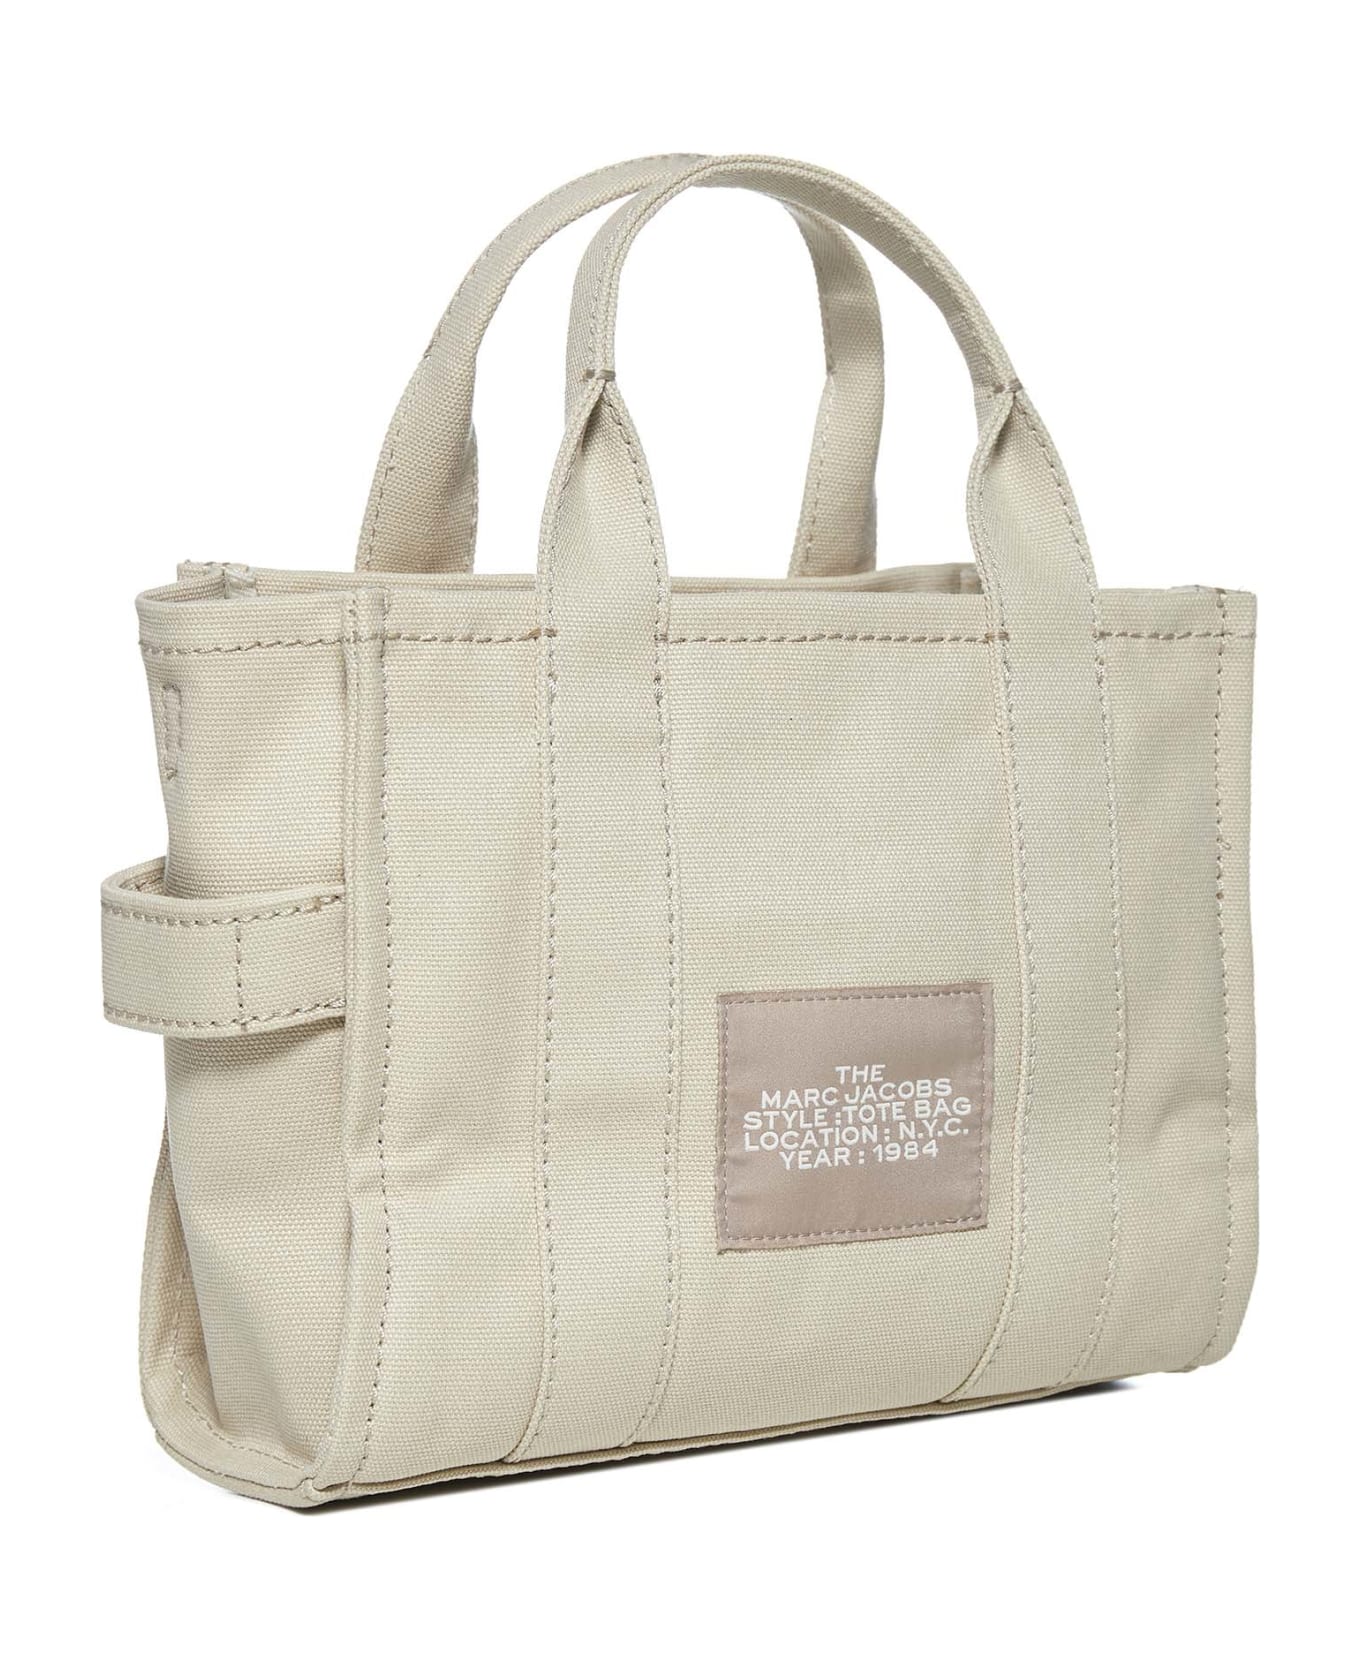 Marc Jacobs The Mini Tote Bag - Beige トートバッグ